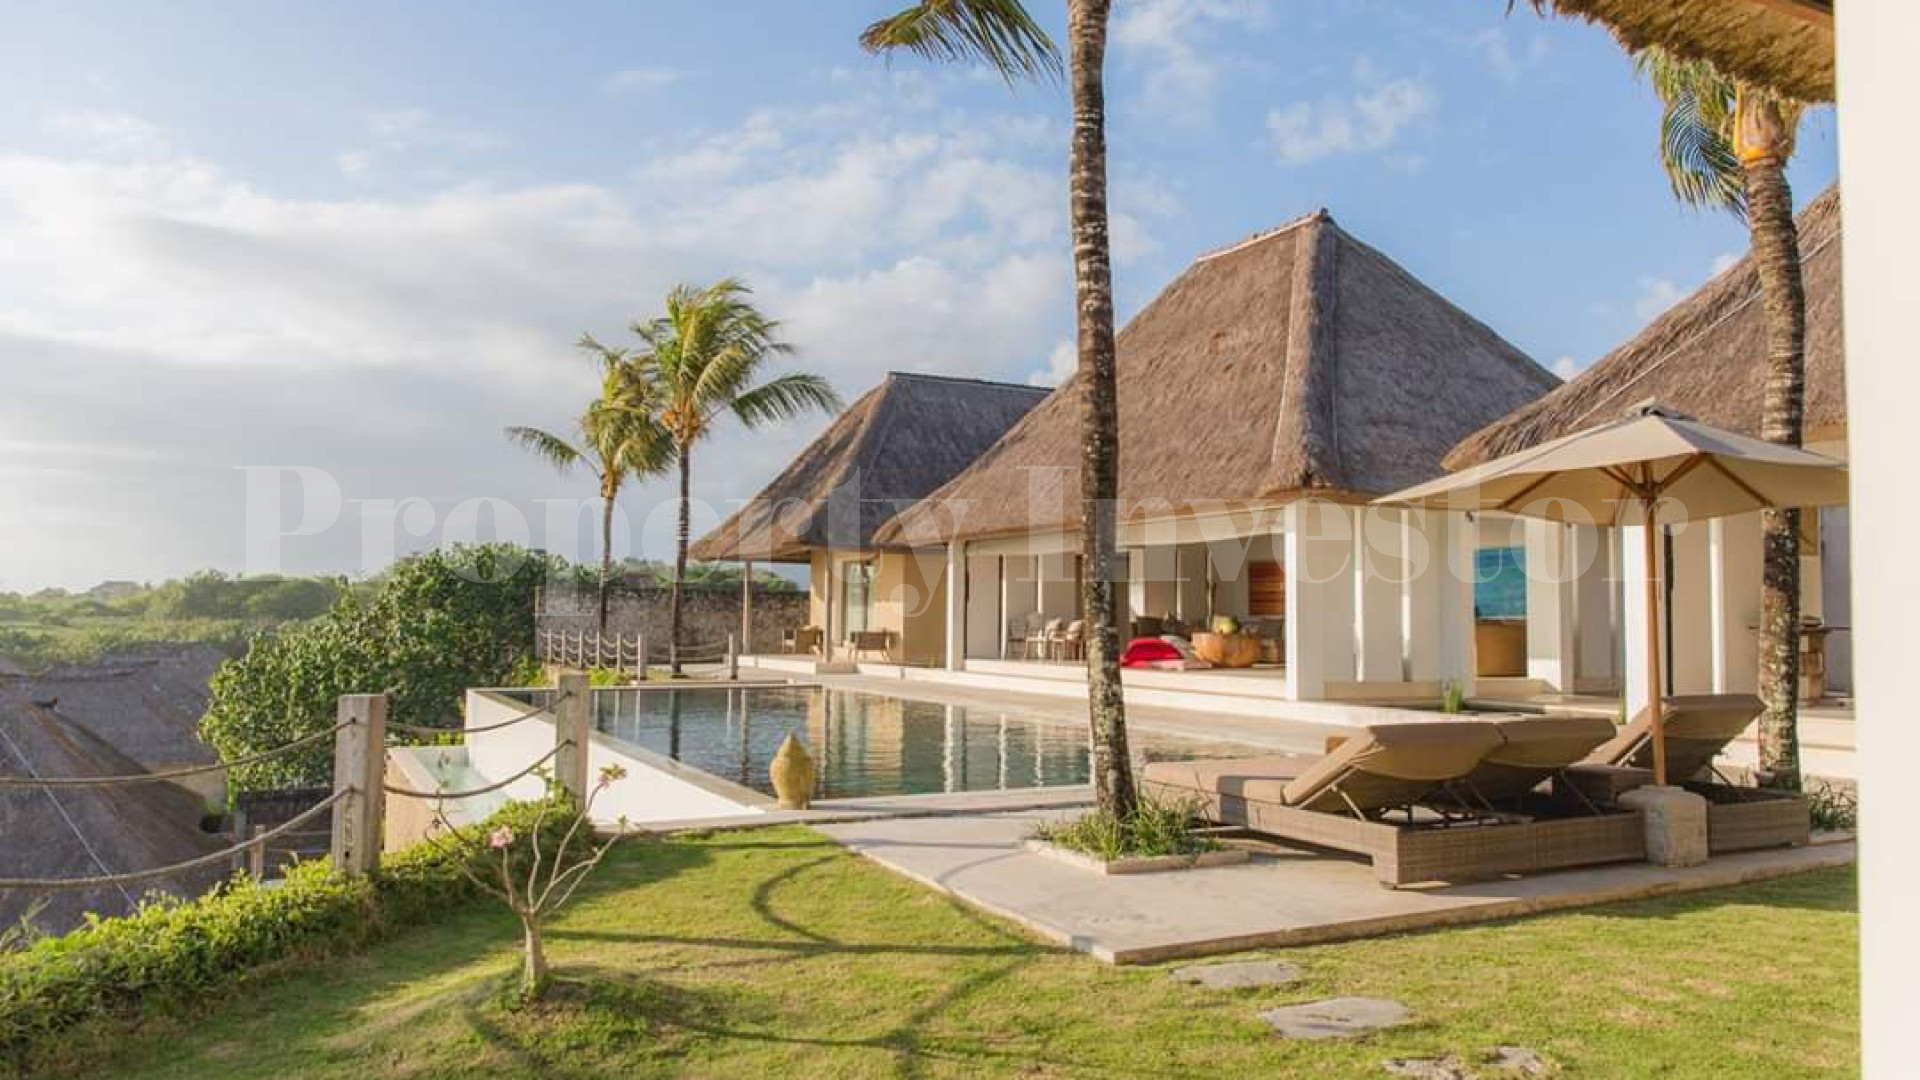 Chic Commercial Beachfront Estate with 4 Luxury Residences (17 Bedrooms) and Spacious Gardens & Pools in Tabanan, Bali